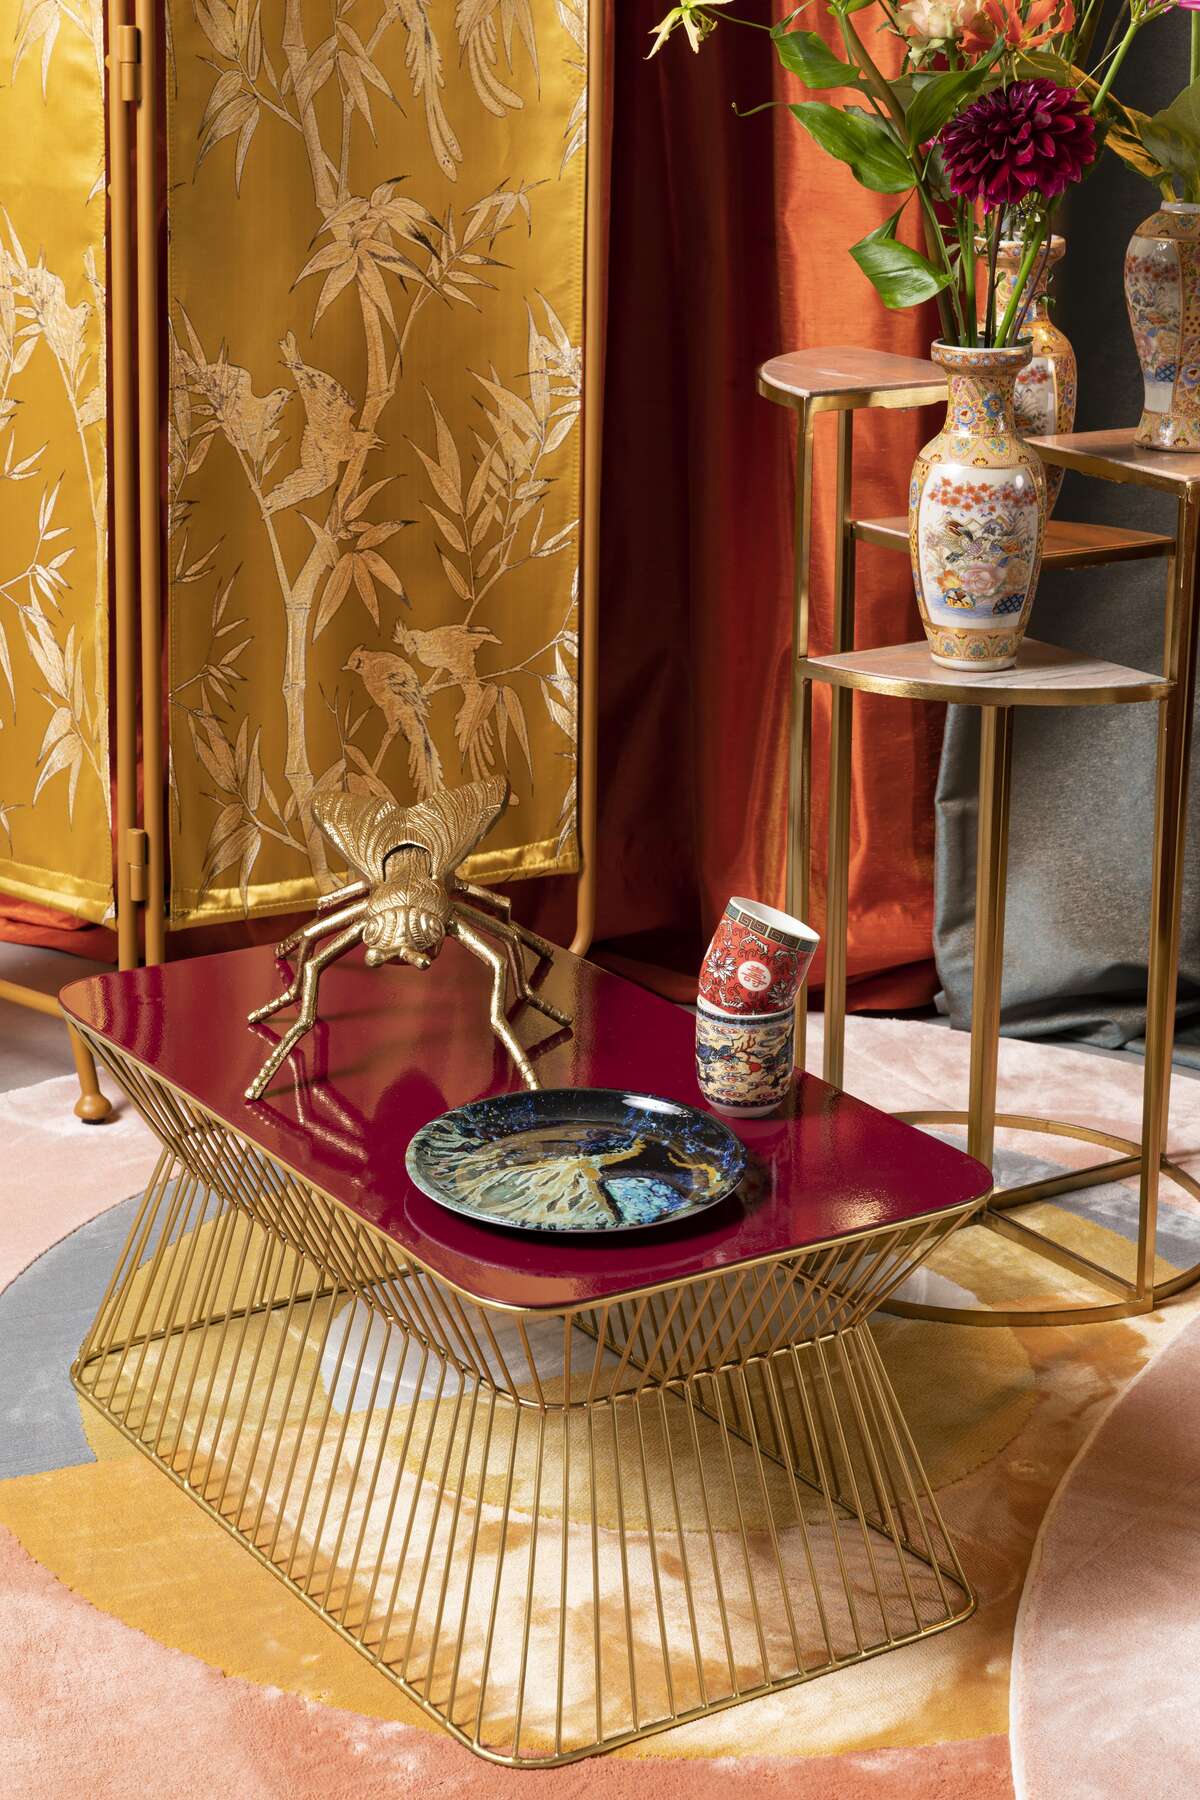 Our Glam coffee table. As the name suggests, it will give your interior a little more splendor. With a shiny enamel surface and a golden "necklace", Glam is simply shining. A table that definitely deserves attention!